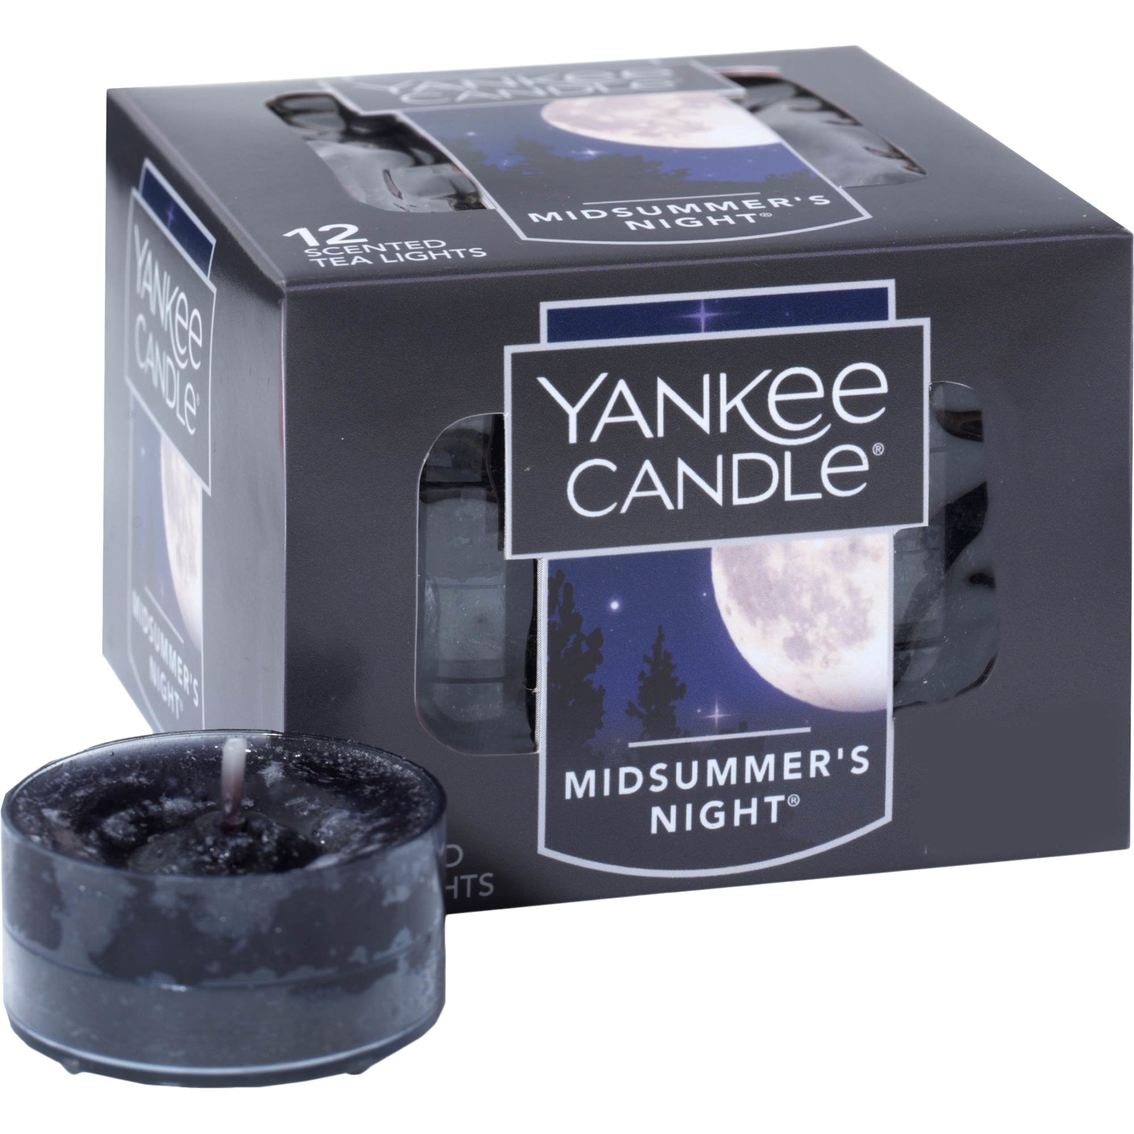 Yankee Candle Midsummer's Night Tea Light Candles 12 Pk., Candles & Home  Fragrance, Household